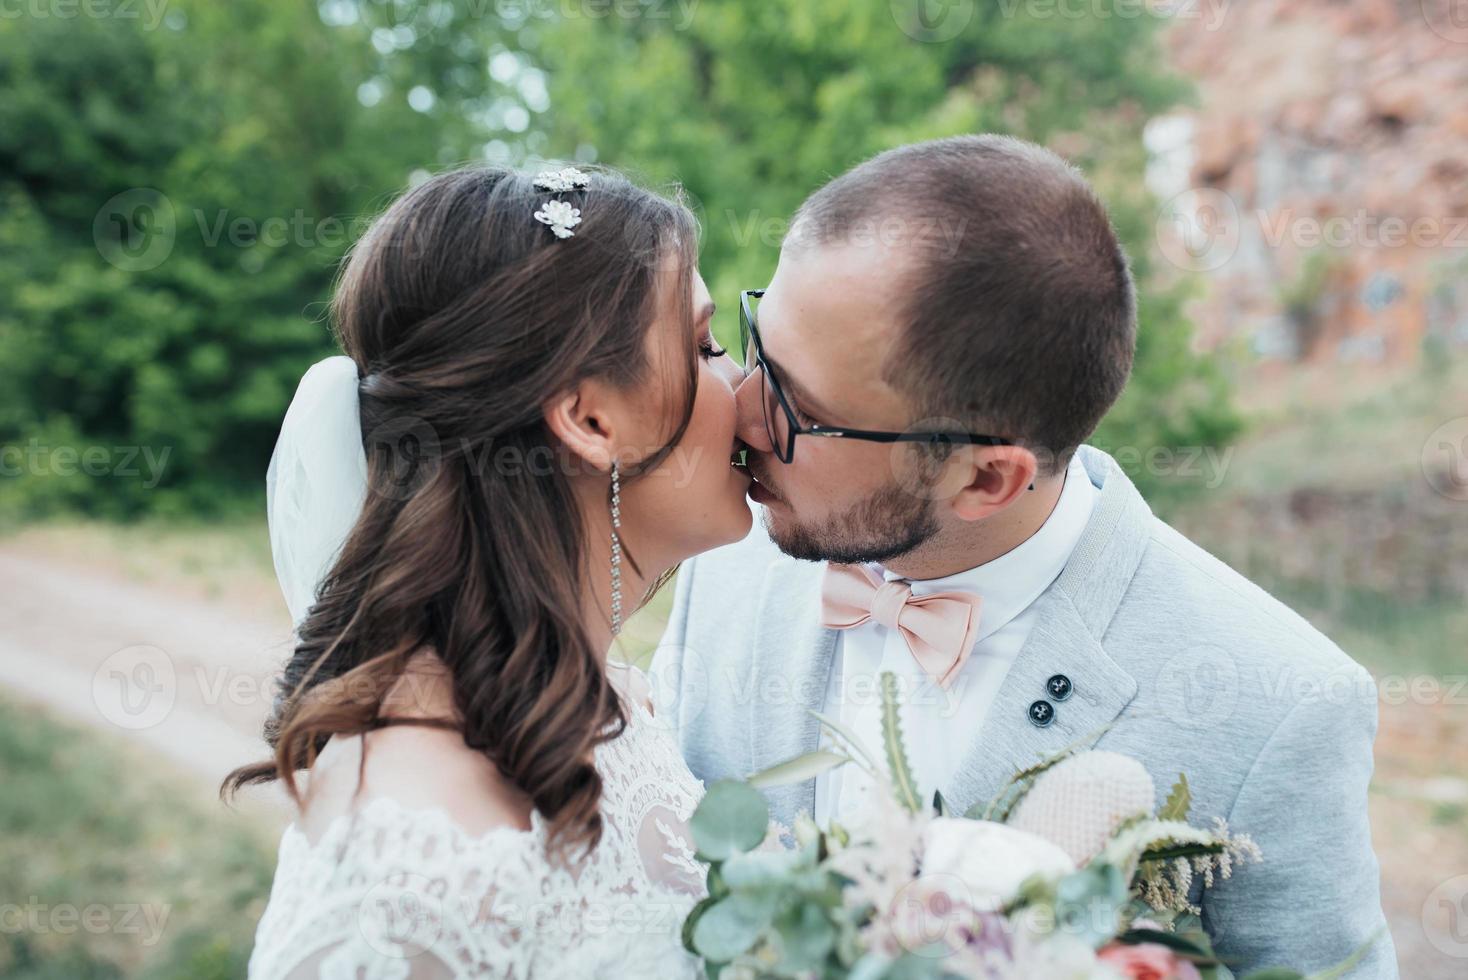 Wedding photography kiss bride and groom in different locations photo